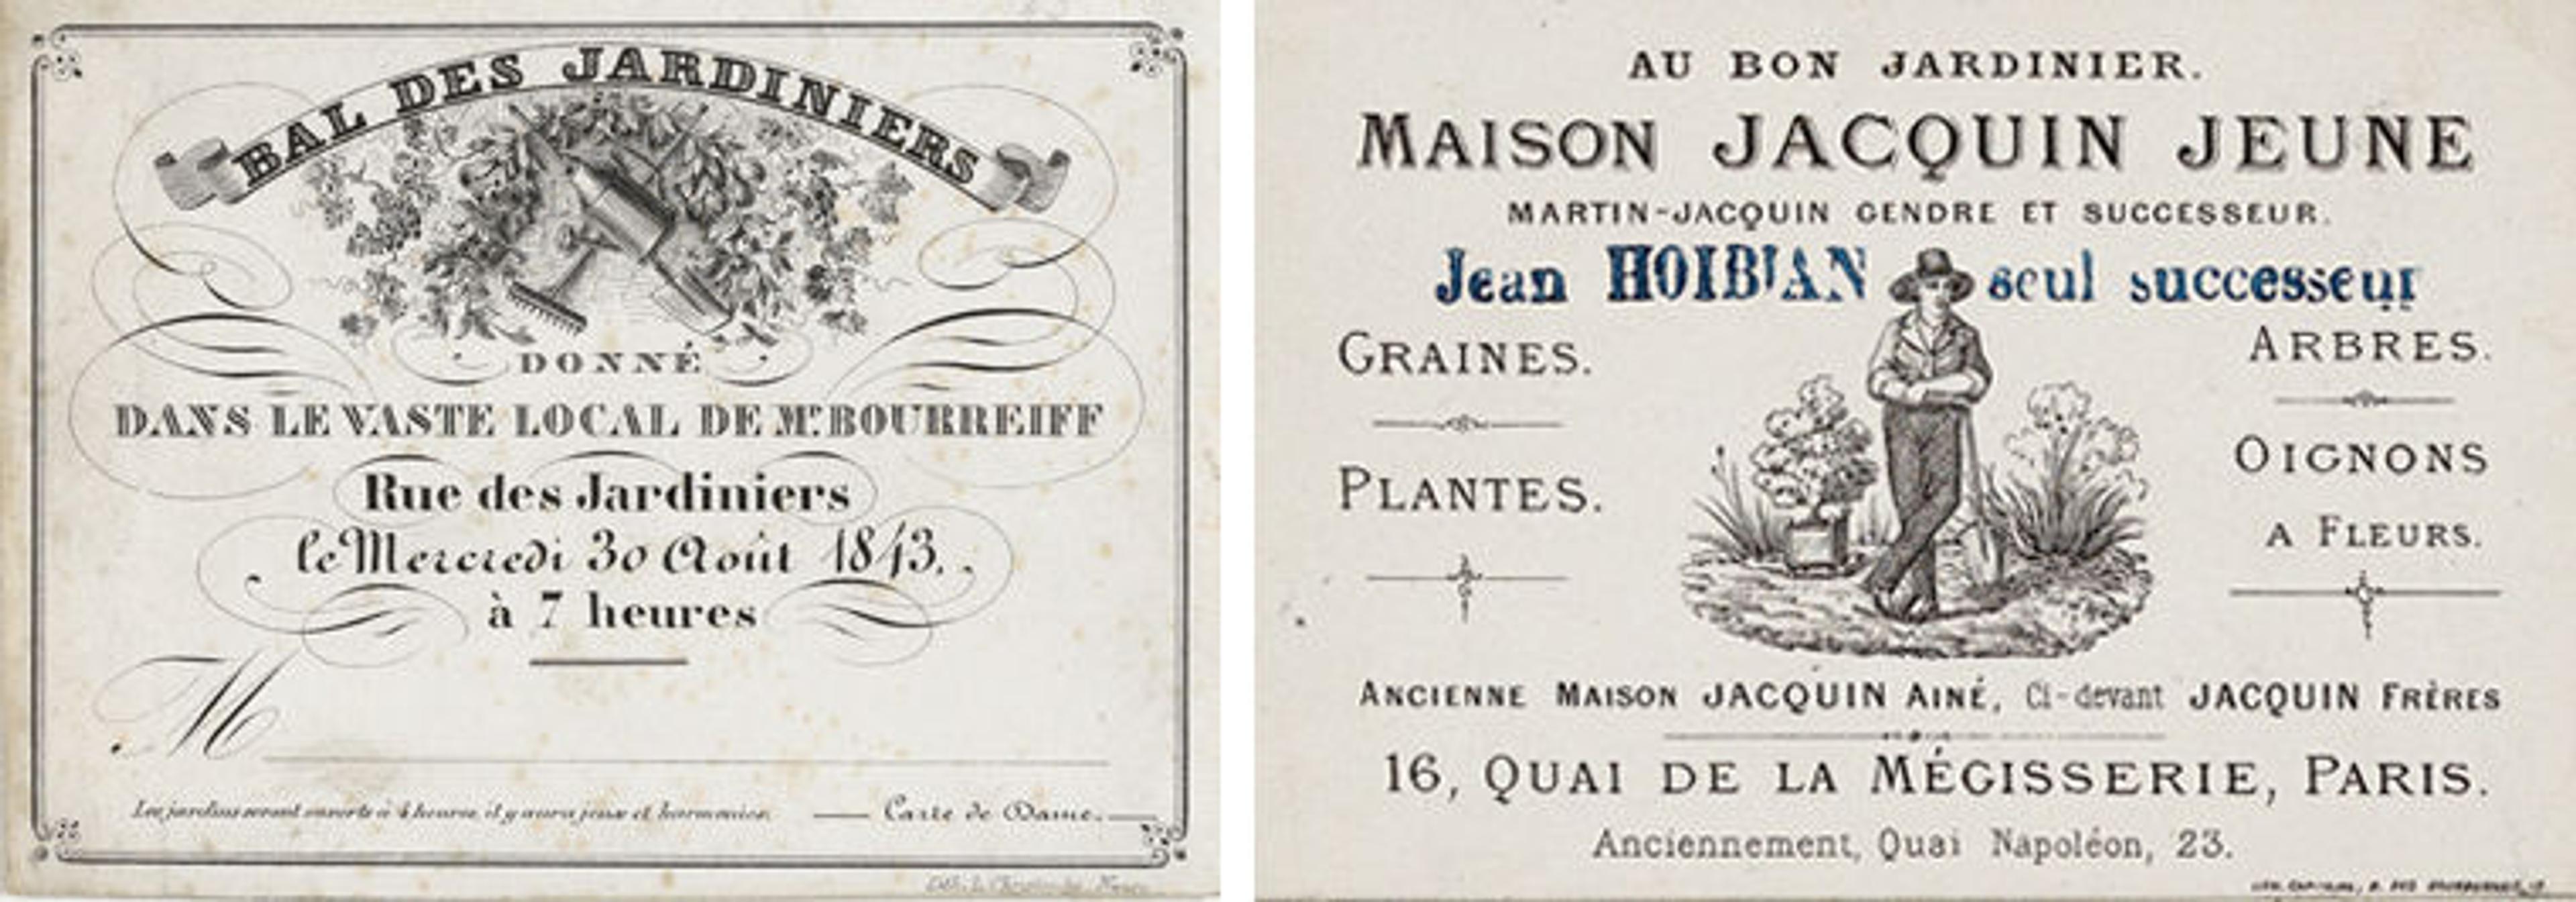 Two pieces of nineteenth-century printed ephemera: at left, an invitation to a gardeners' ball; at right, a trade card advertisement for a Parisian garden supplier